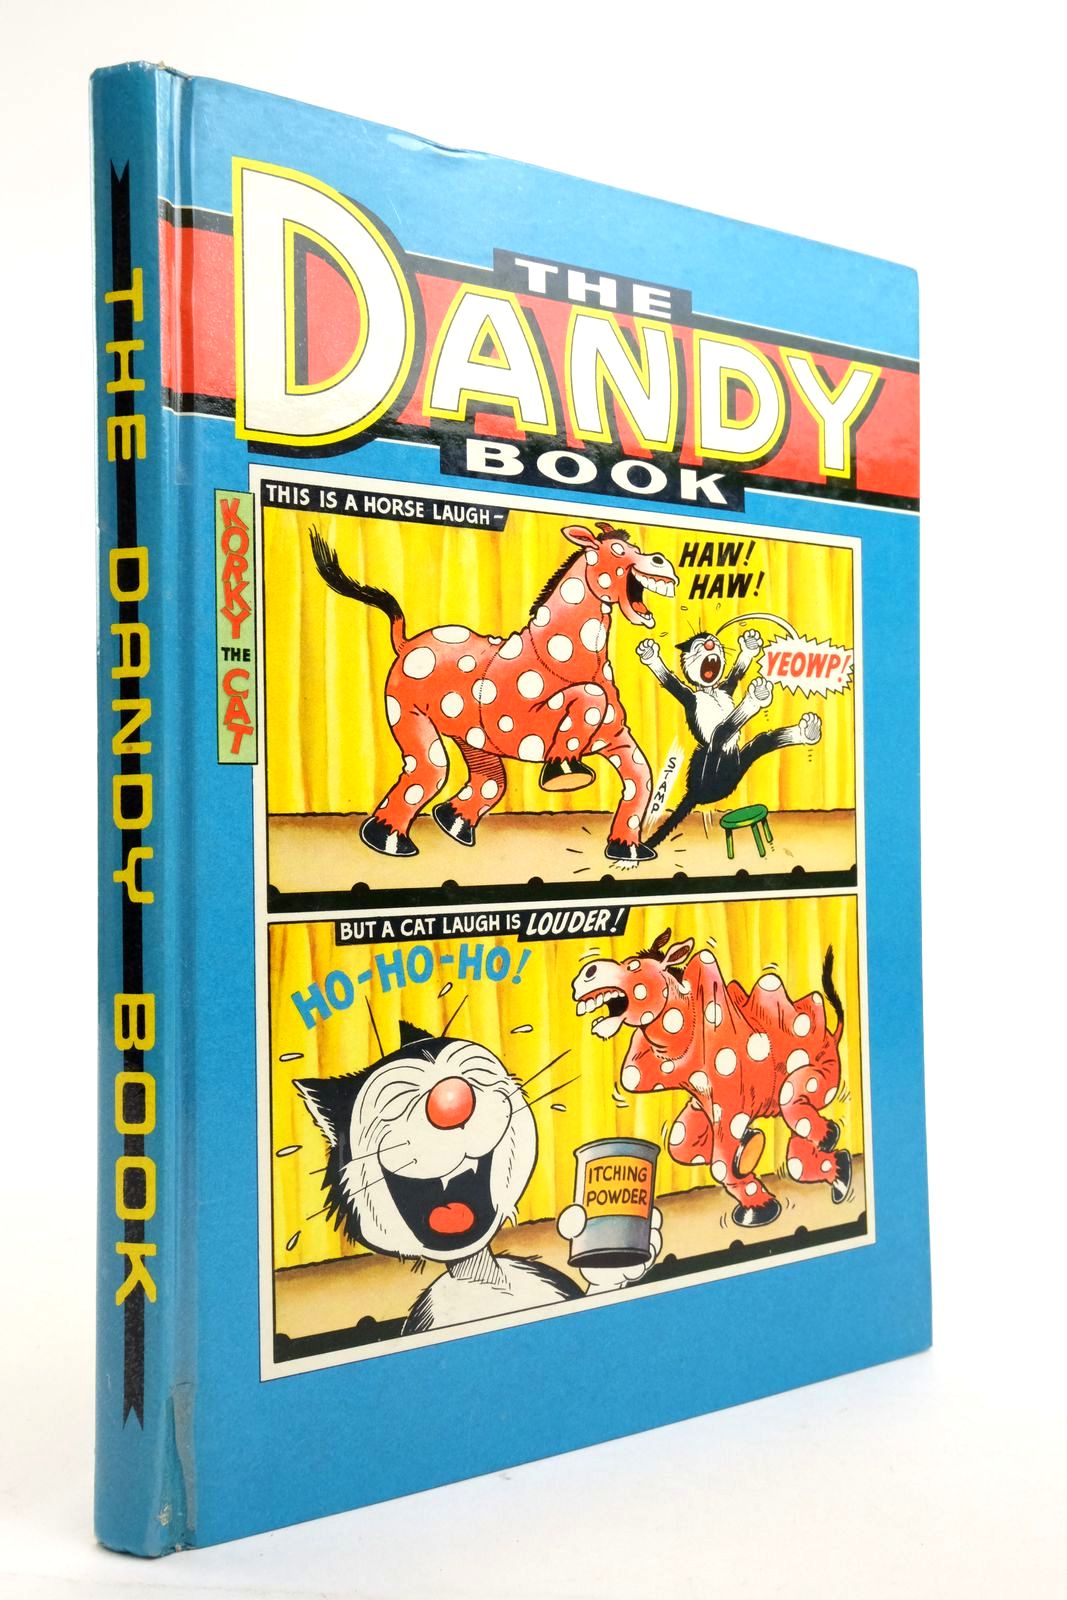 Photo of THE DANDY BOOK 1965 published by D.C. Thomson &amp; Co Ltd. (STOCK CODE: 2137184)  for sale by Stella & Rose's Books